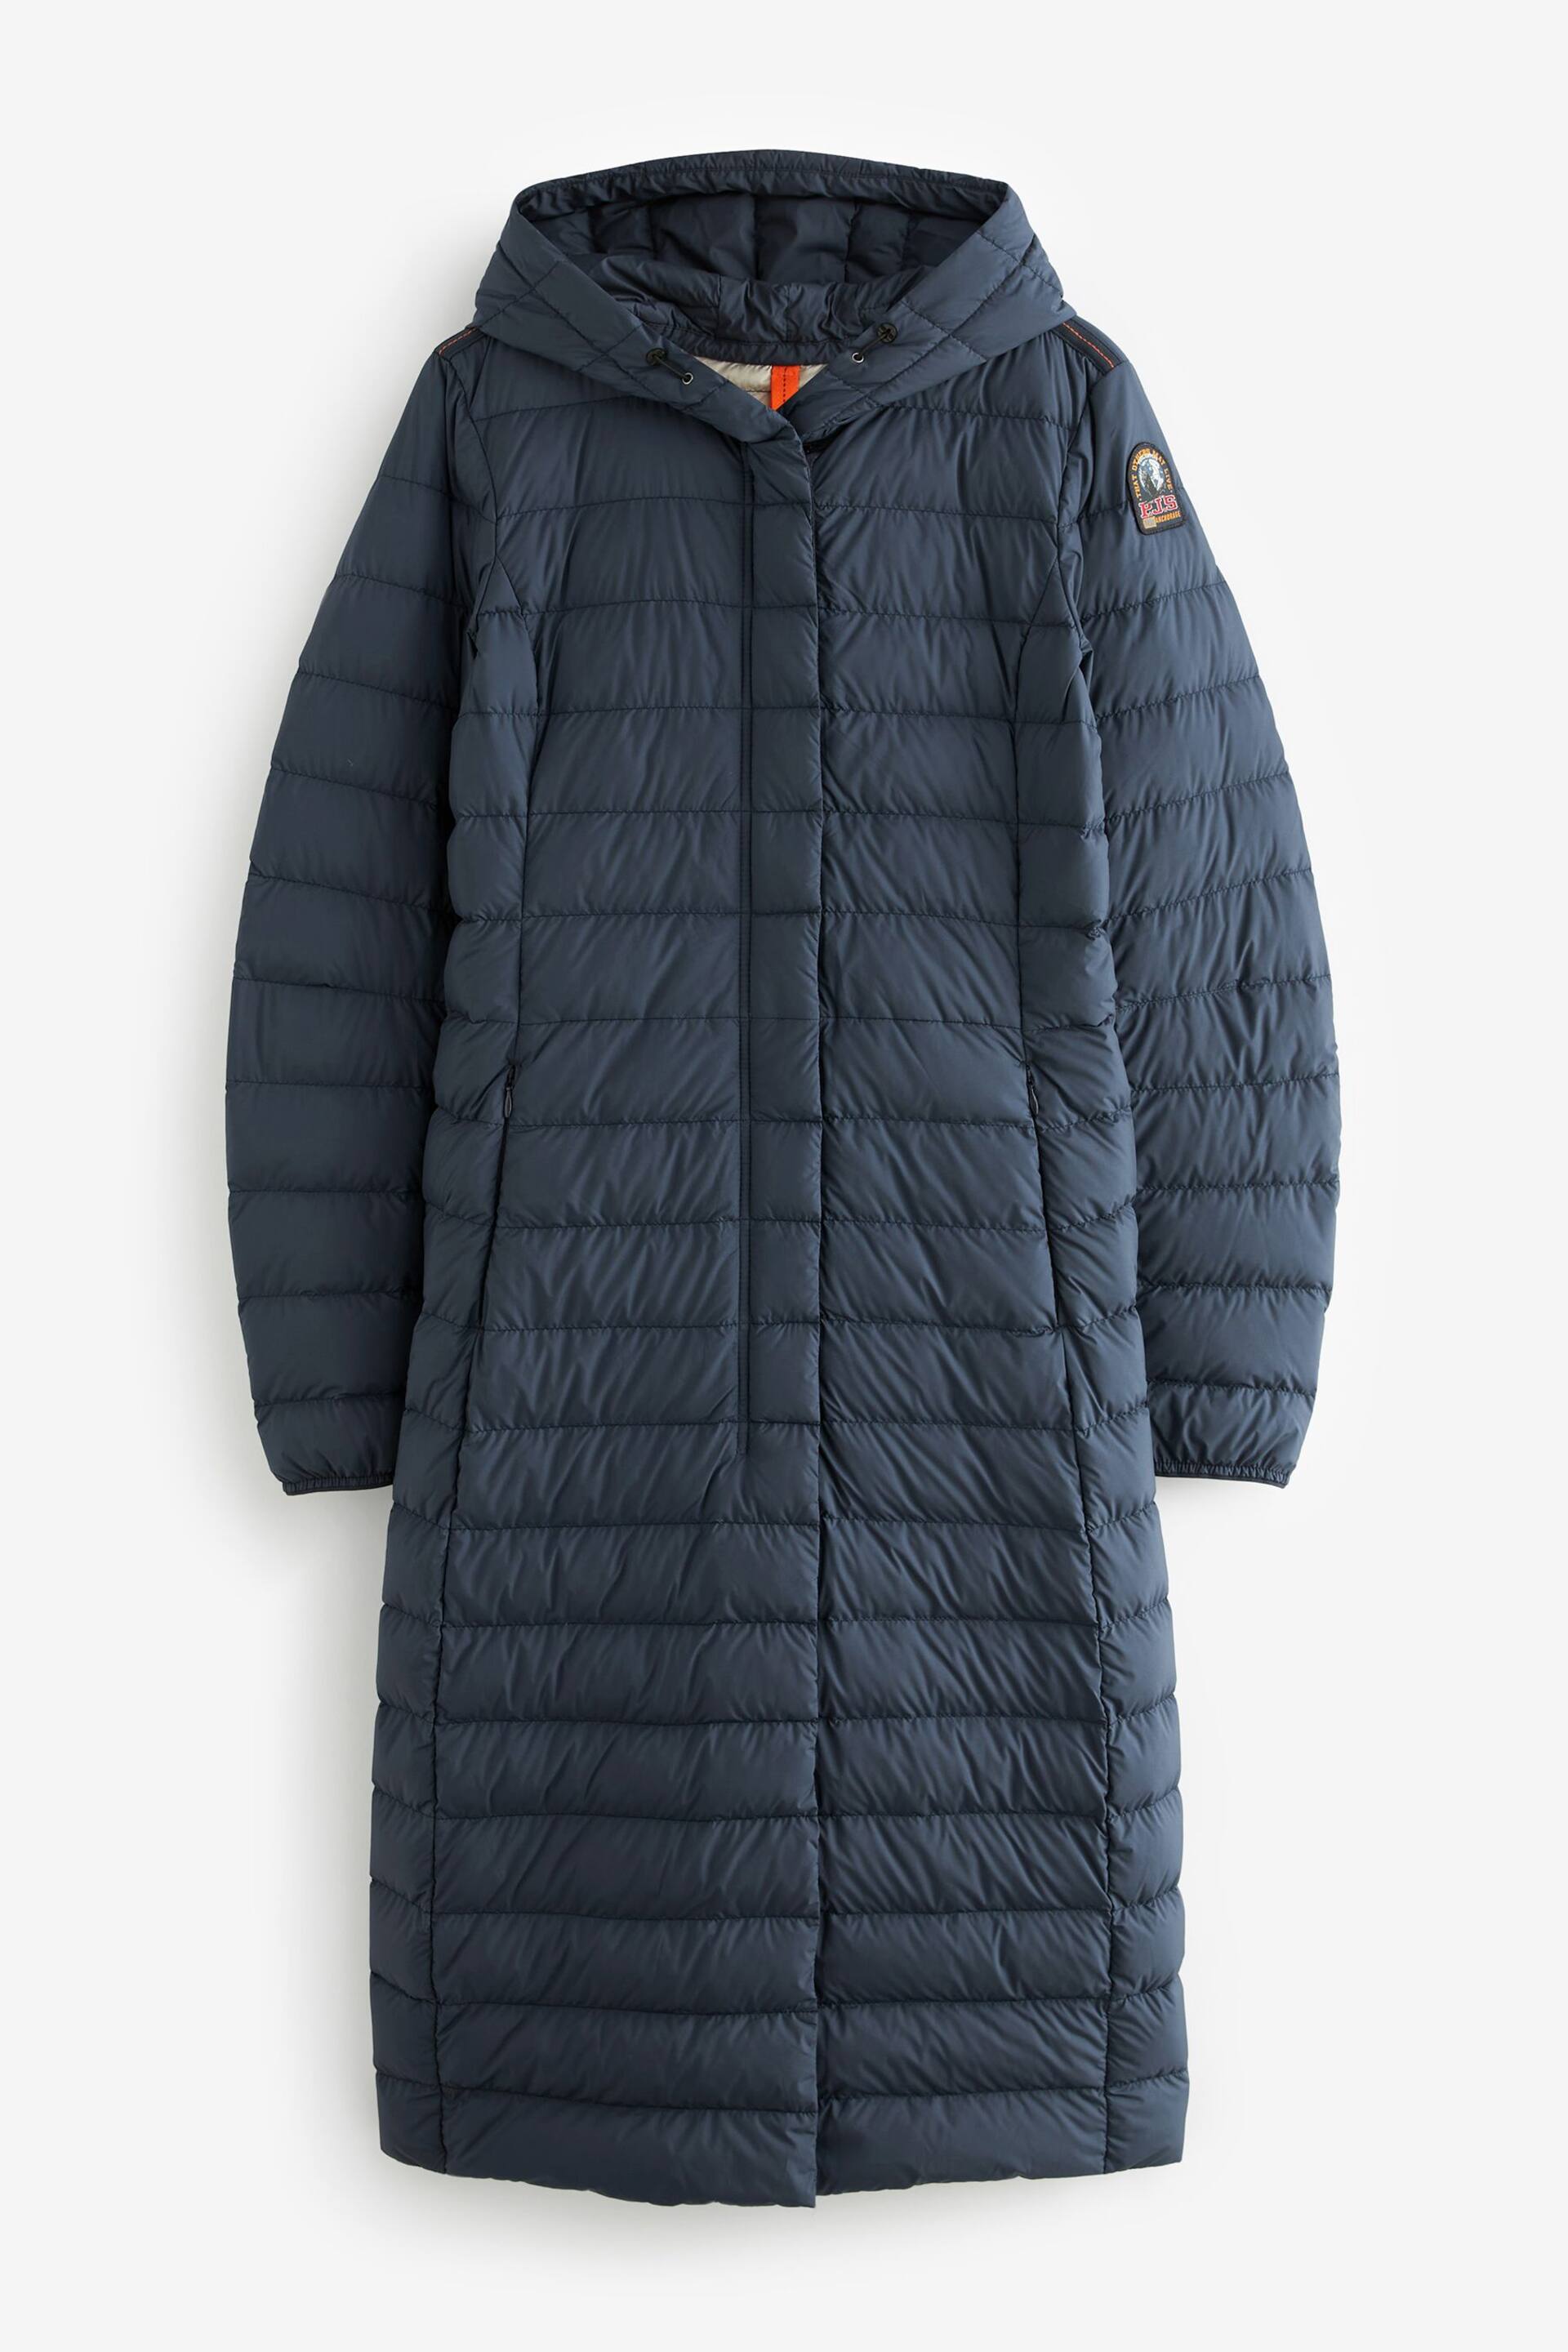 Parajumpers Navy Omega Super Light Weight Long Puffer Coat - Image 1 of 3